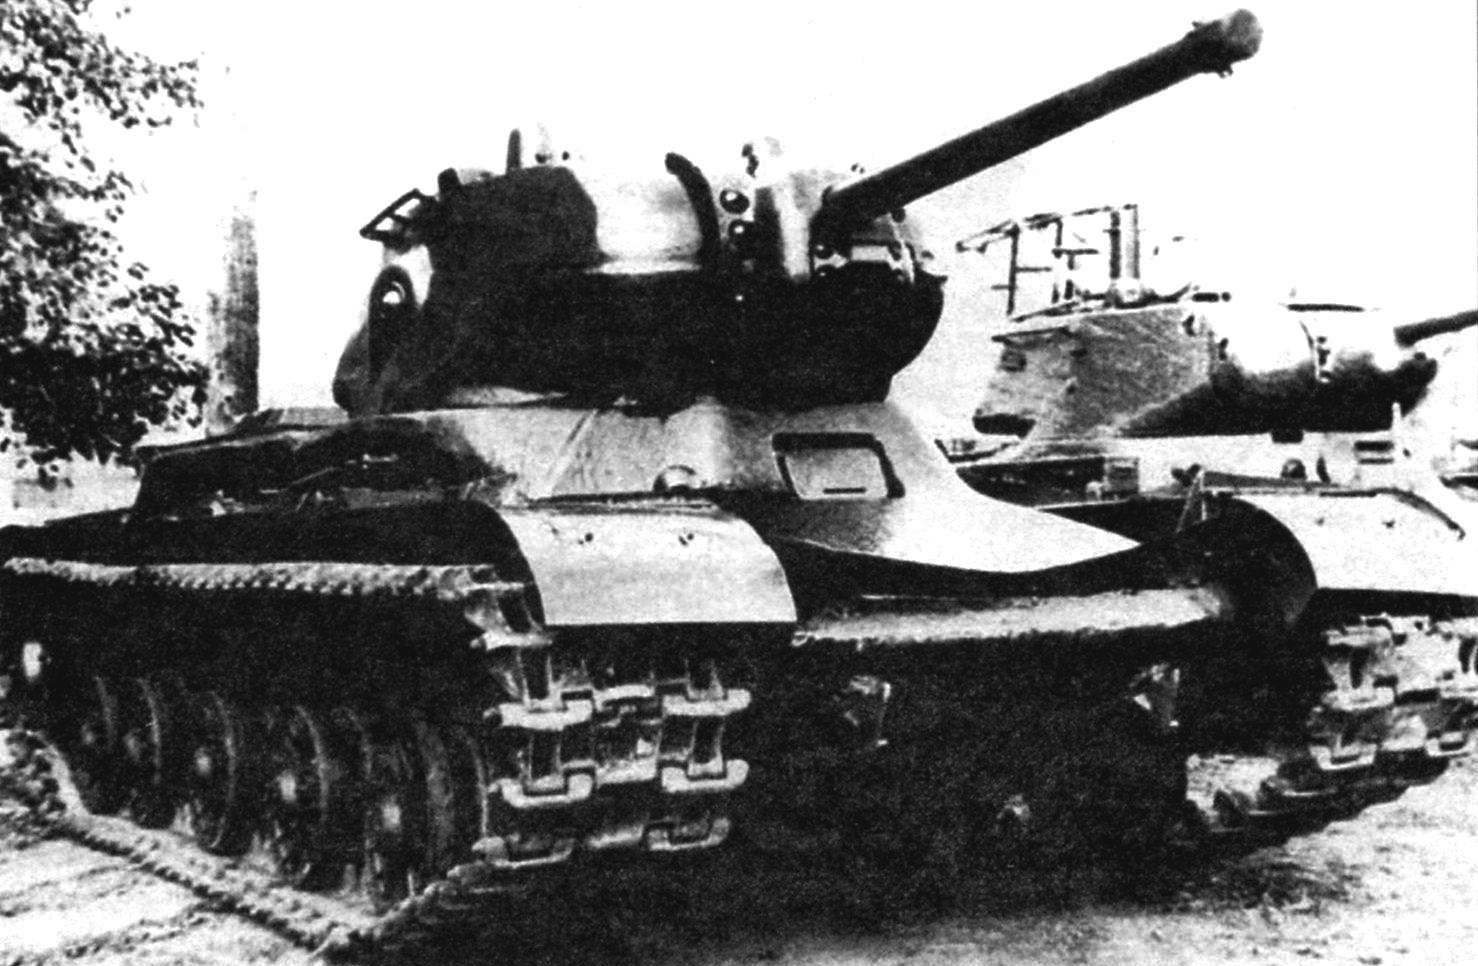 Tank KV-13 in the court of the Chelyabinsk plant No. 100. March, 1943